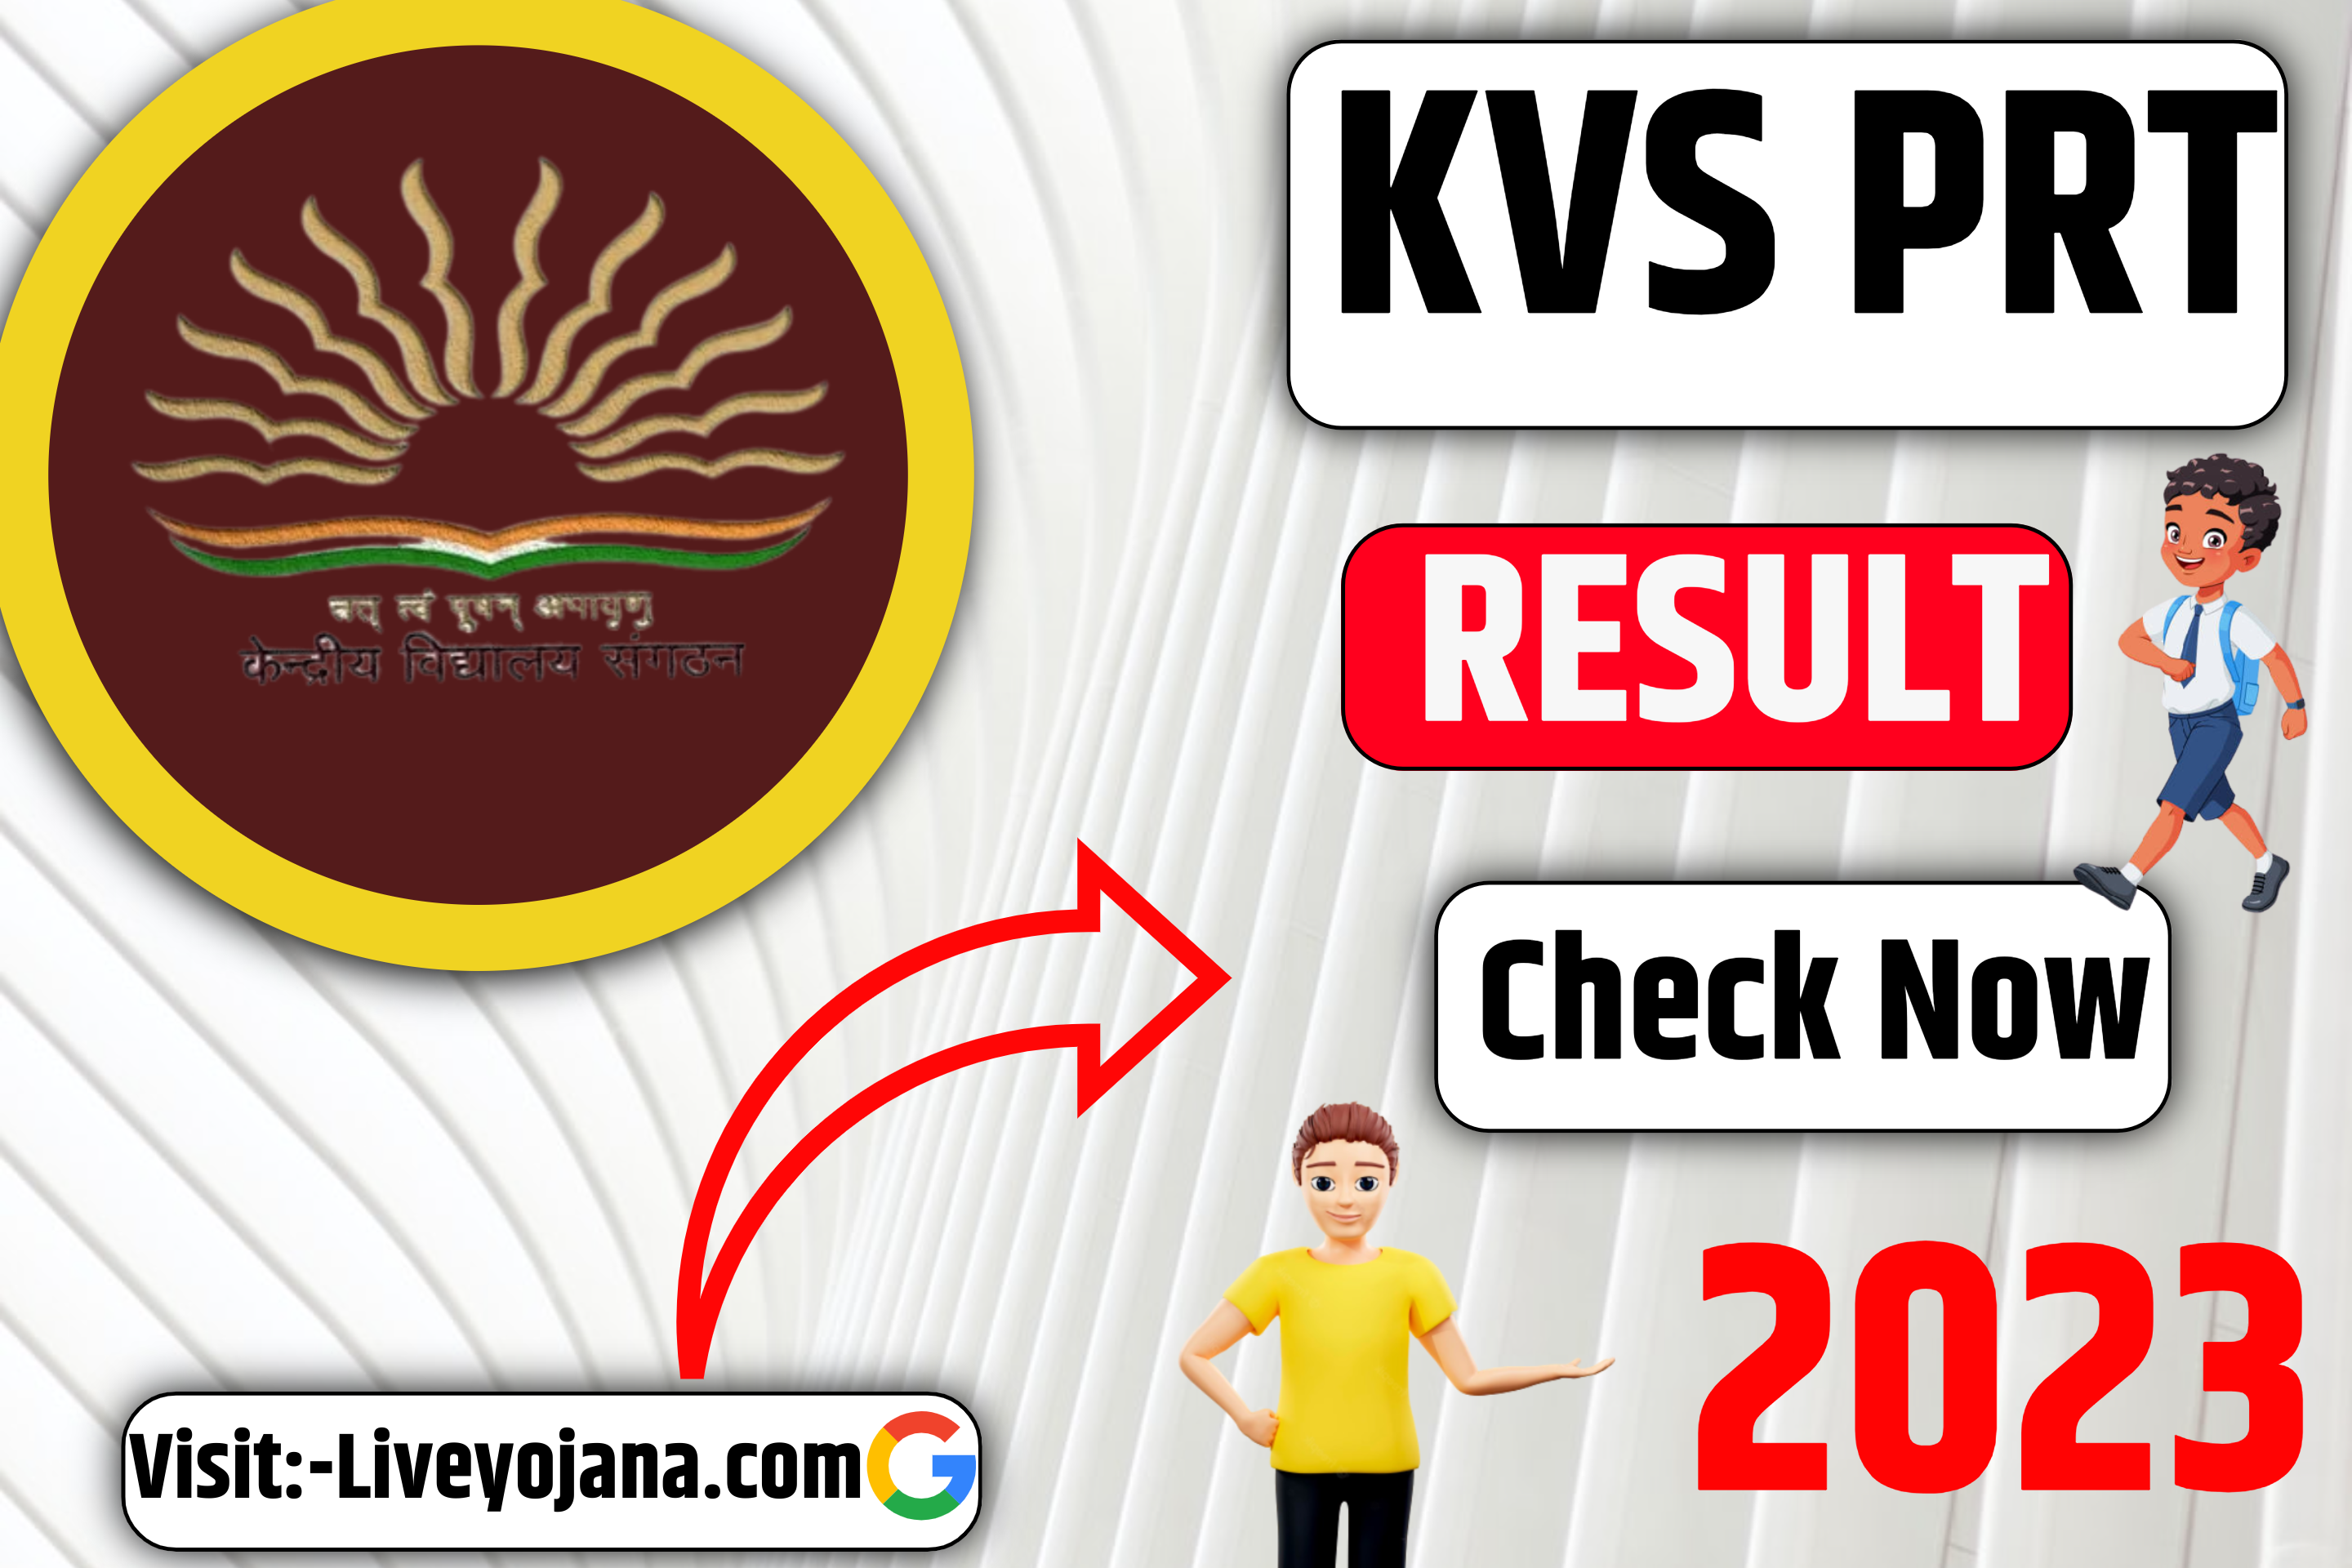 "Discover KVS PRT 2023 Updates: Check Cut Off, Merit List, Syllabus, Eligibility, and Online Application Now 